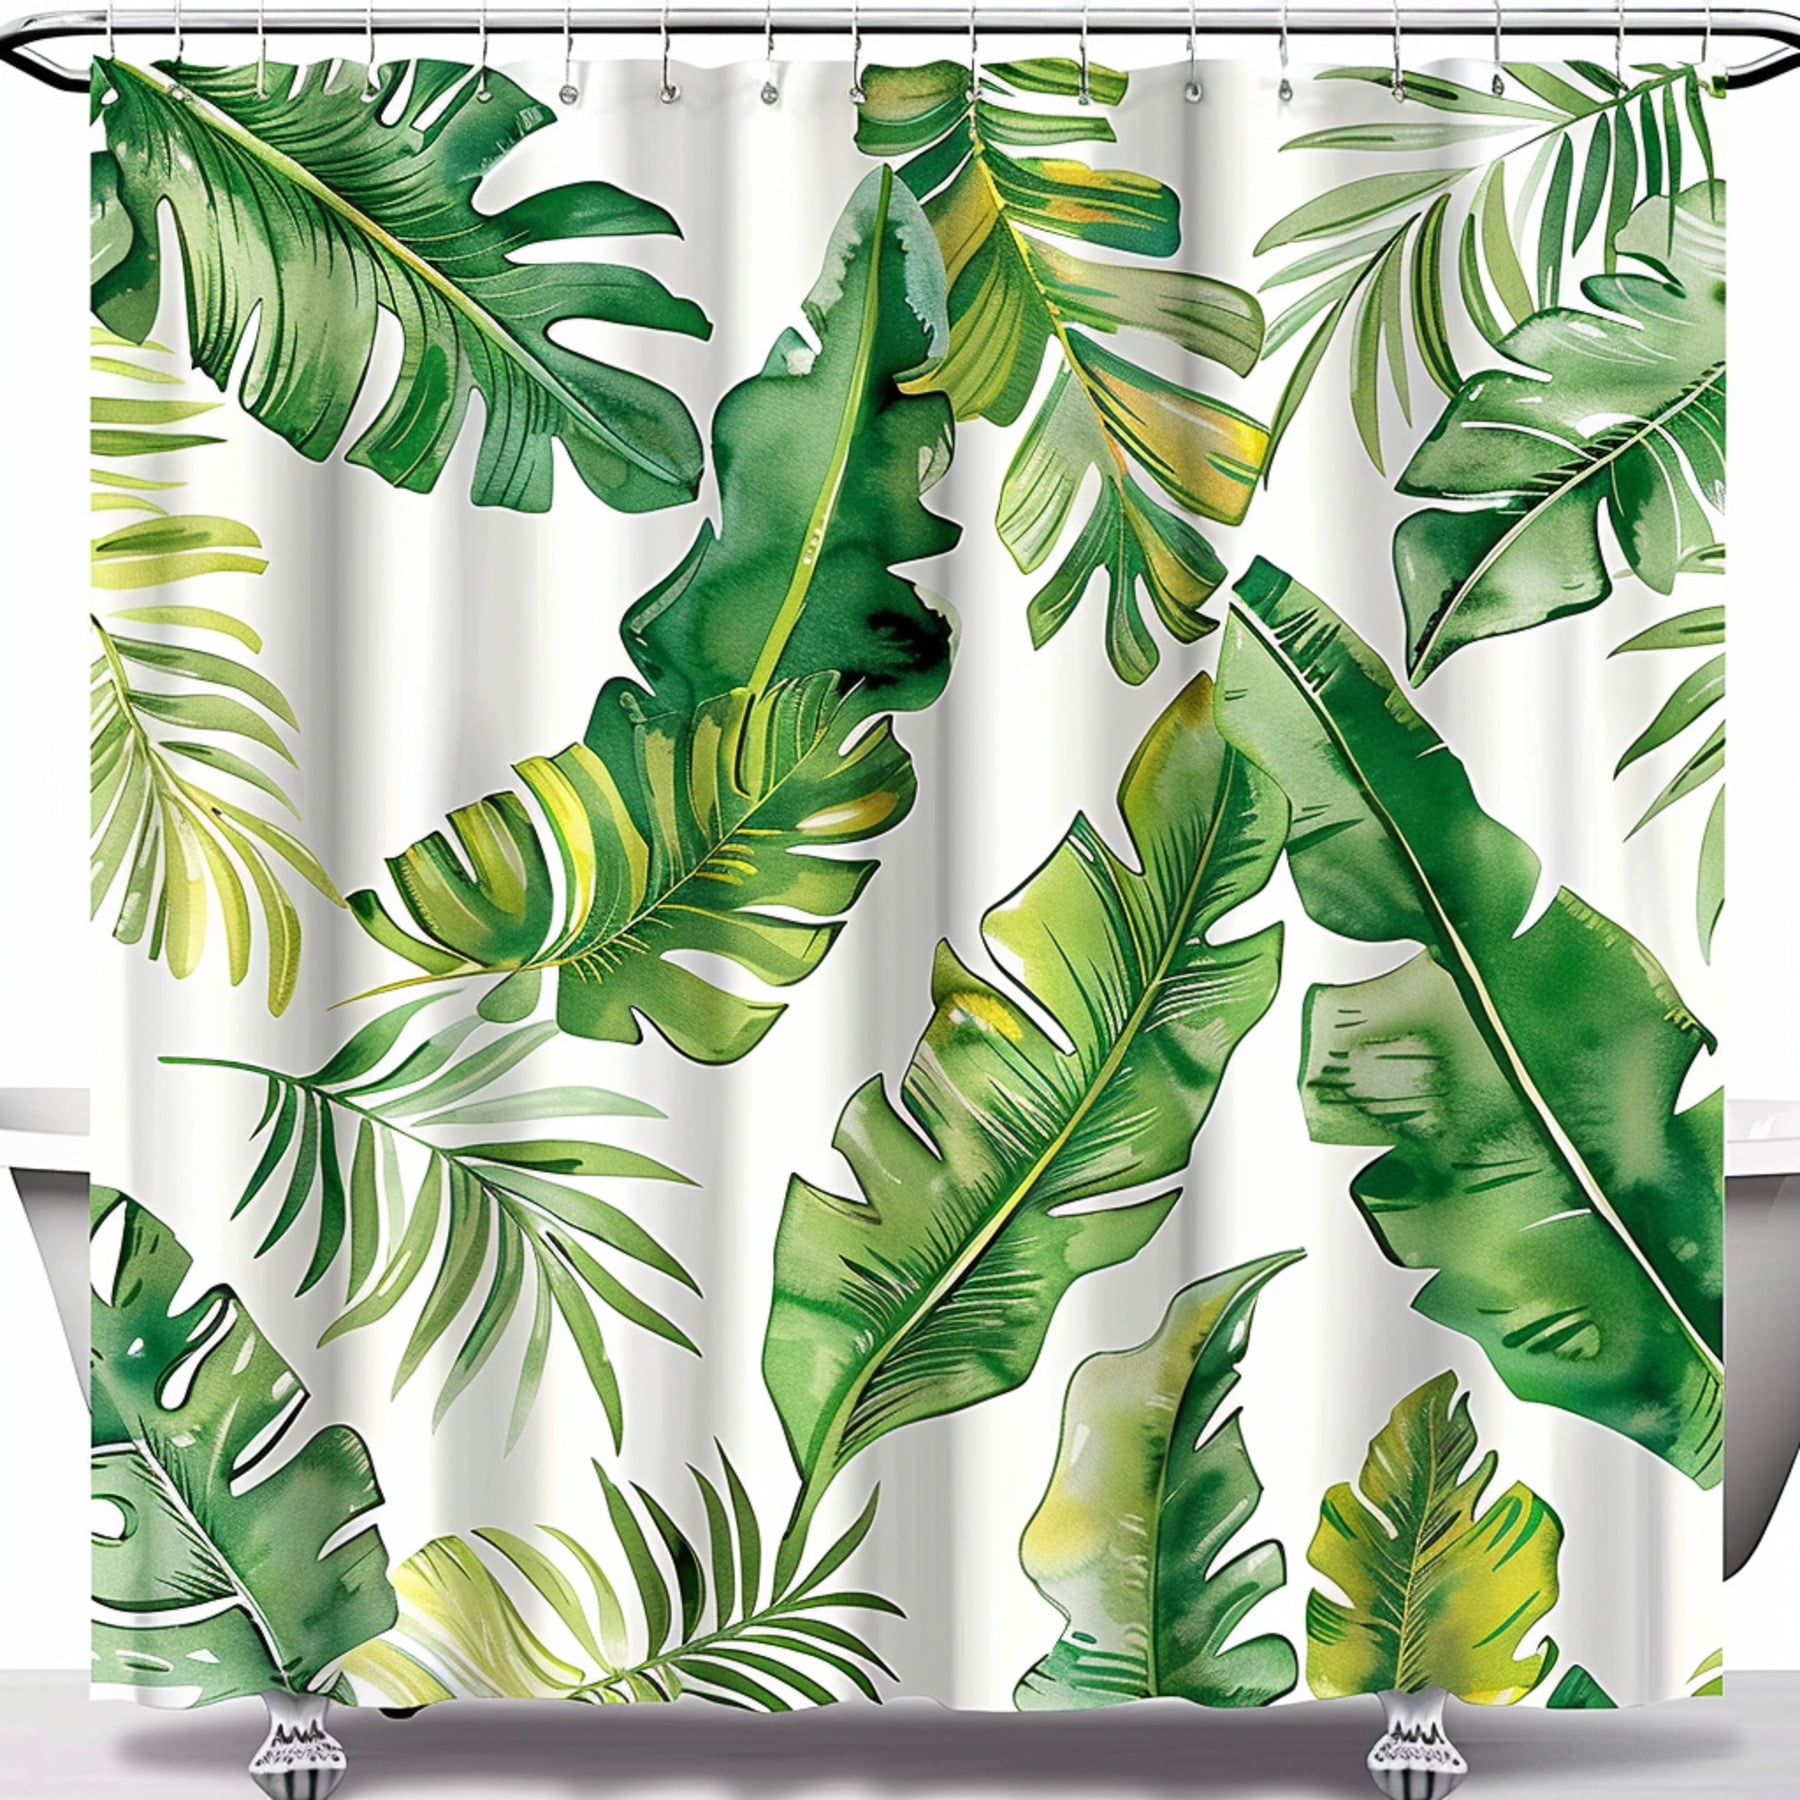 Boho Style Tropical Banana Leaves Watercolor Shower Curtain With Palm